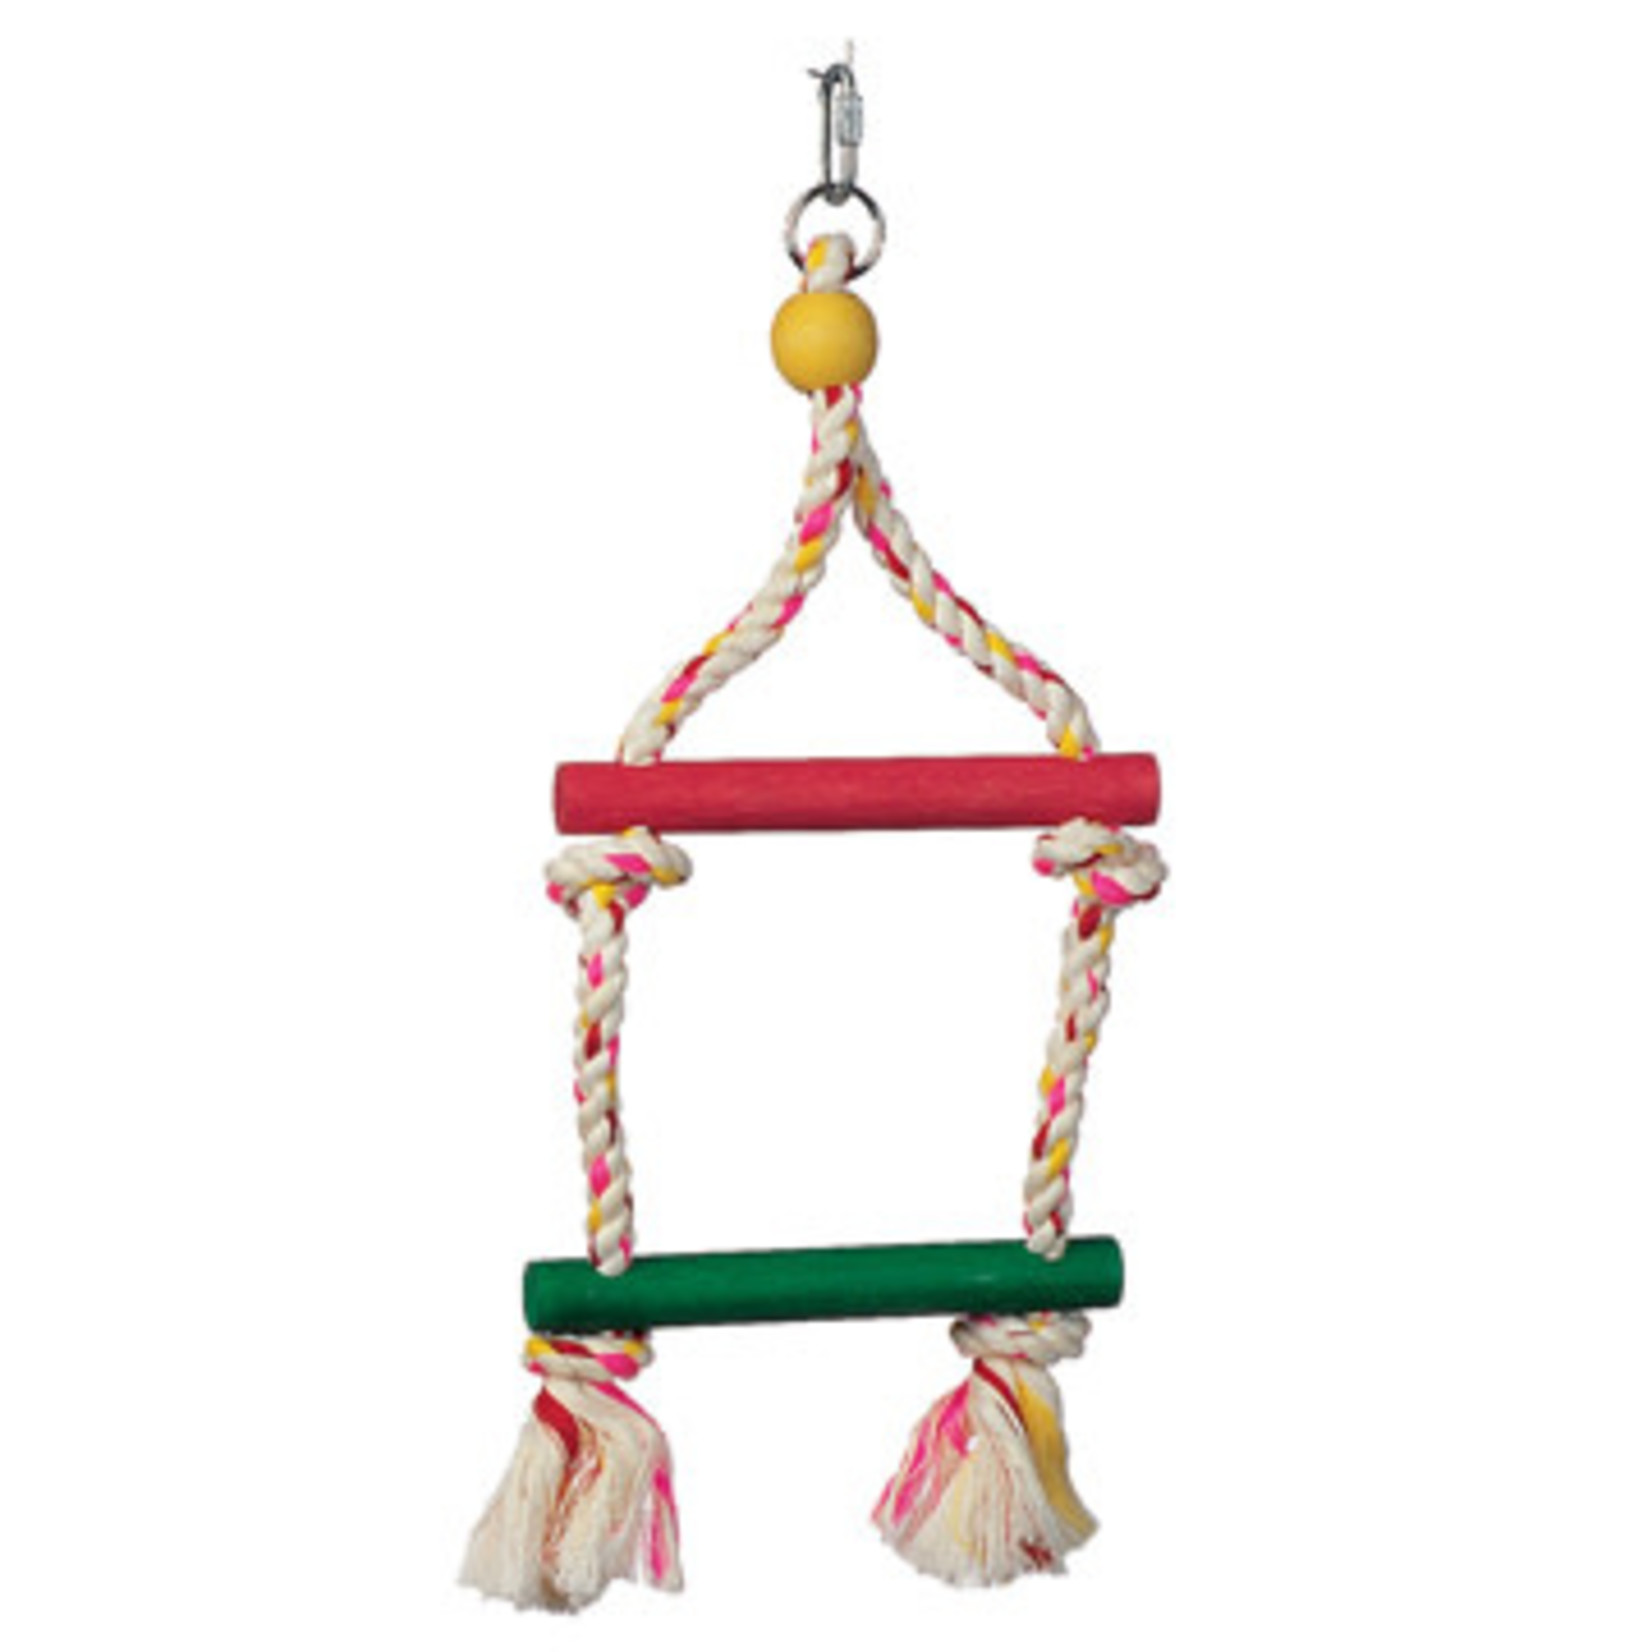 LIVING WORLD Junglewood 2-Step Rope Ladder, Small, 6" x 14